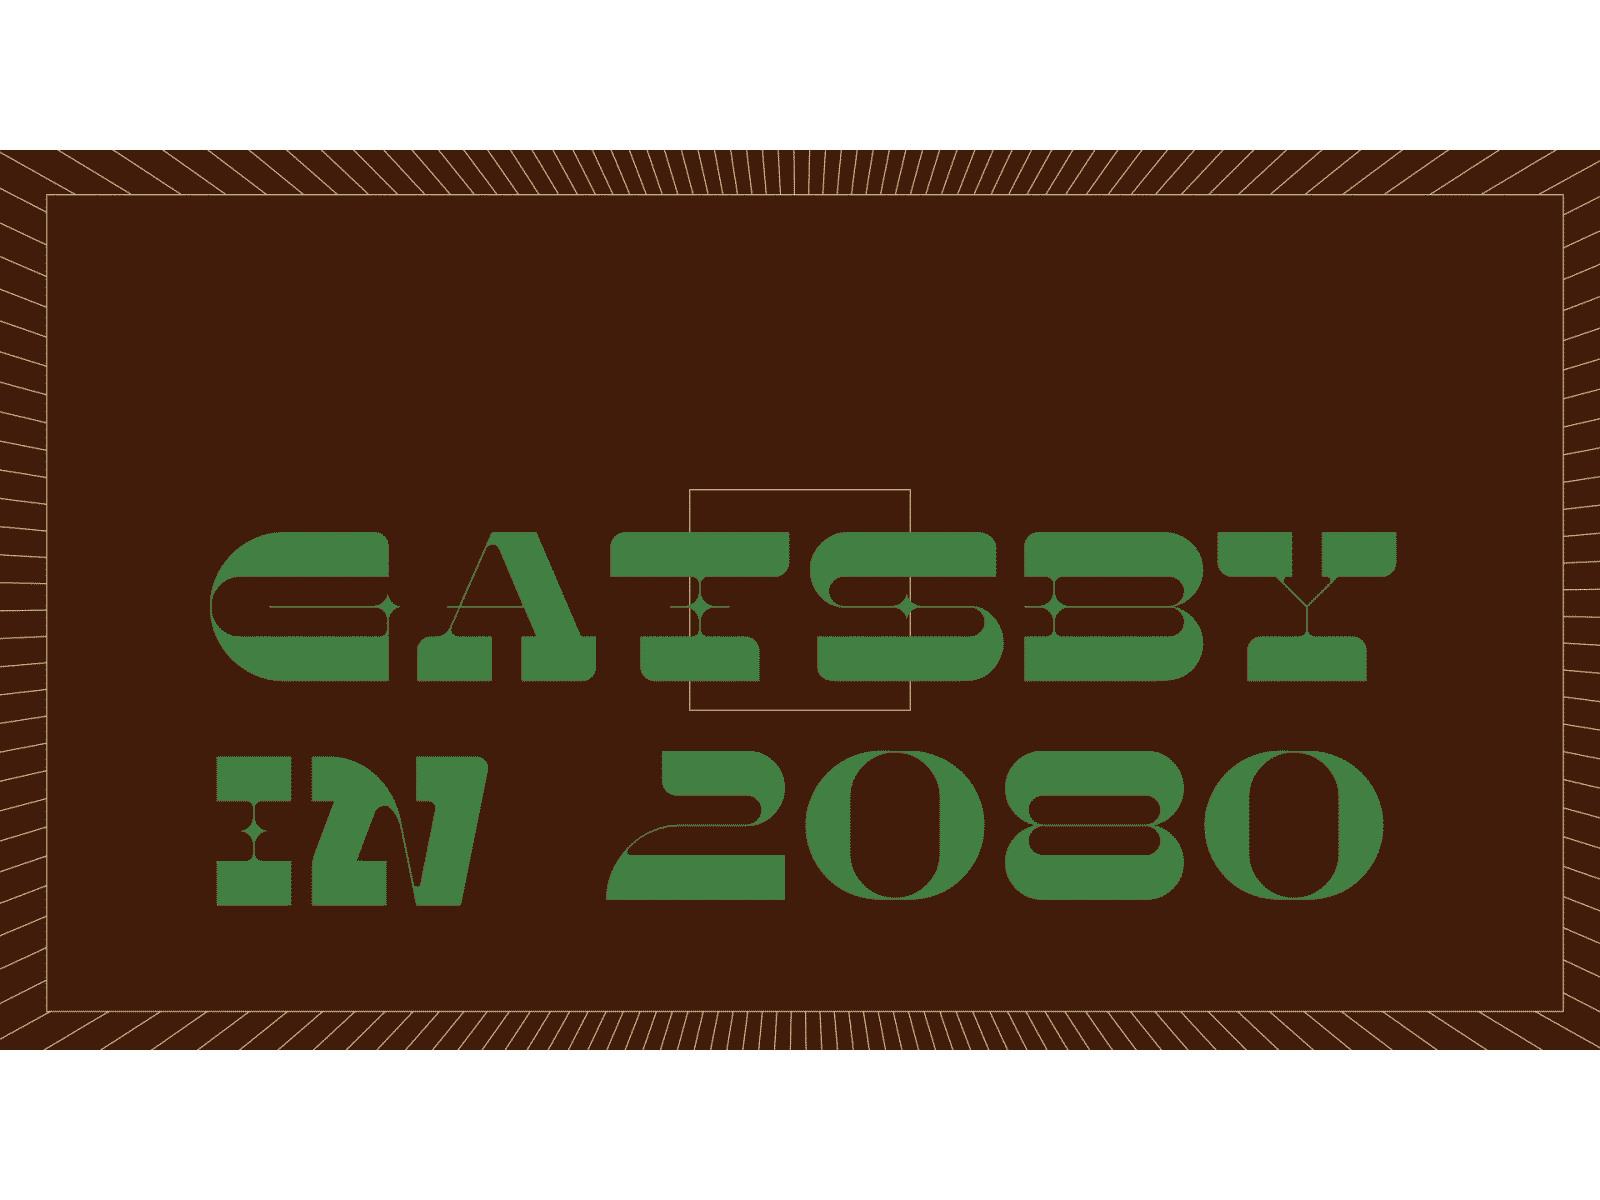 Gatsby in 2080 after effects animation gatsby lineart motion design typeface vector